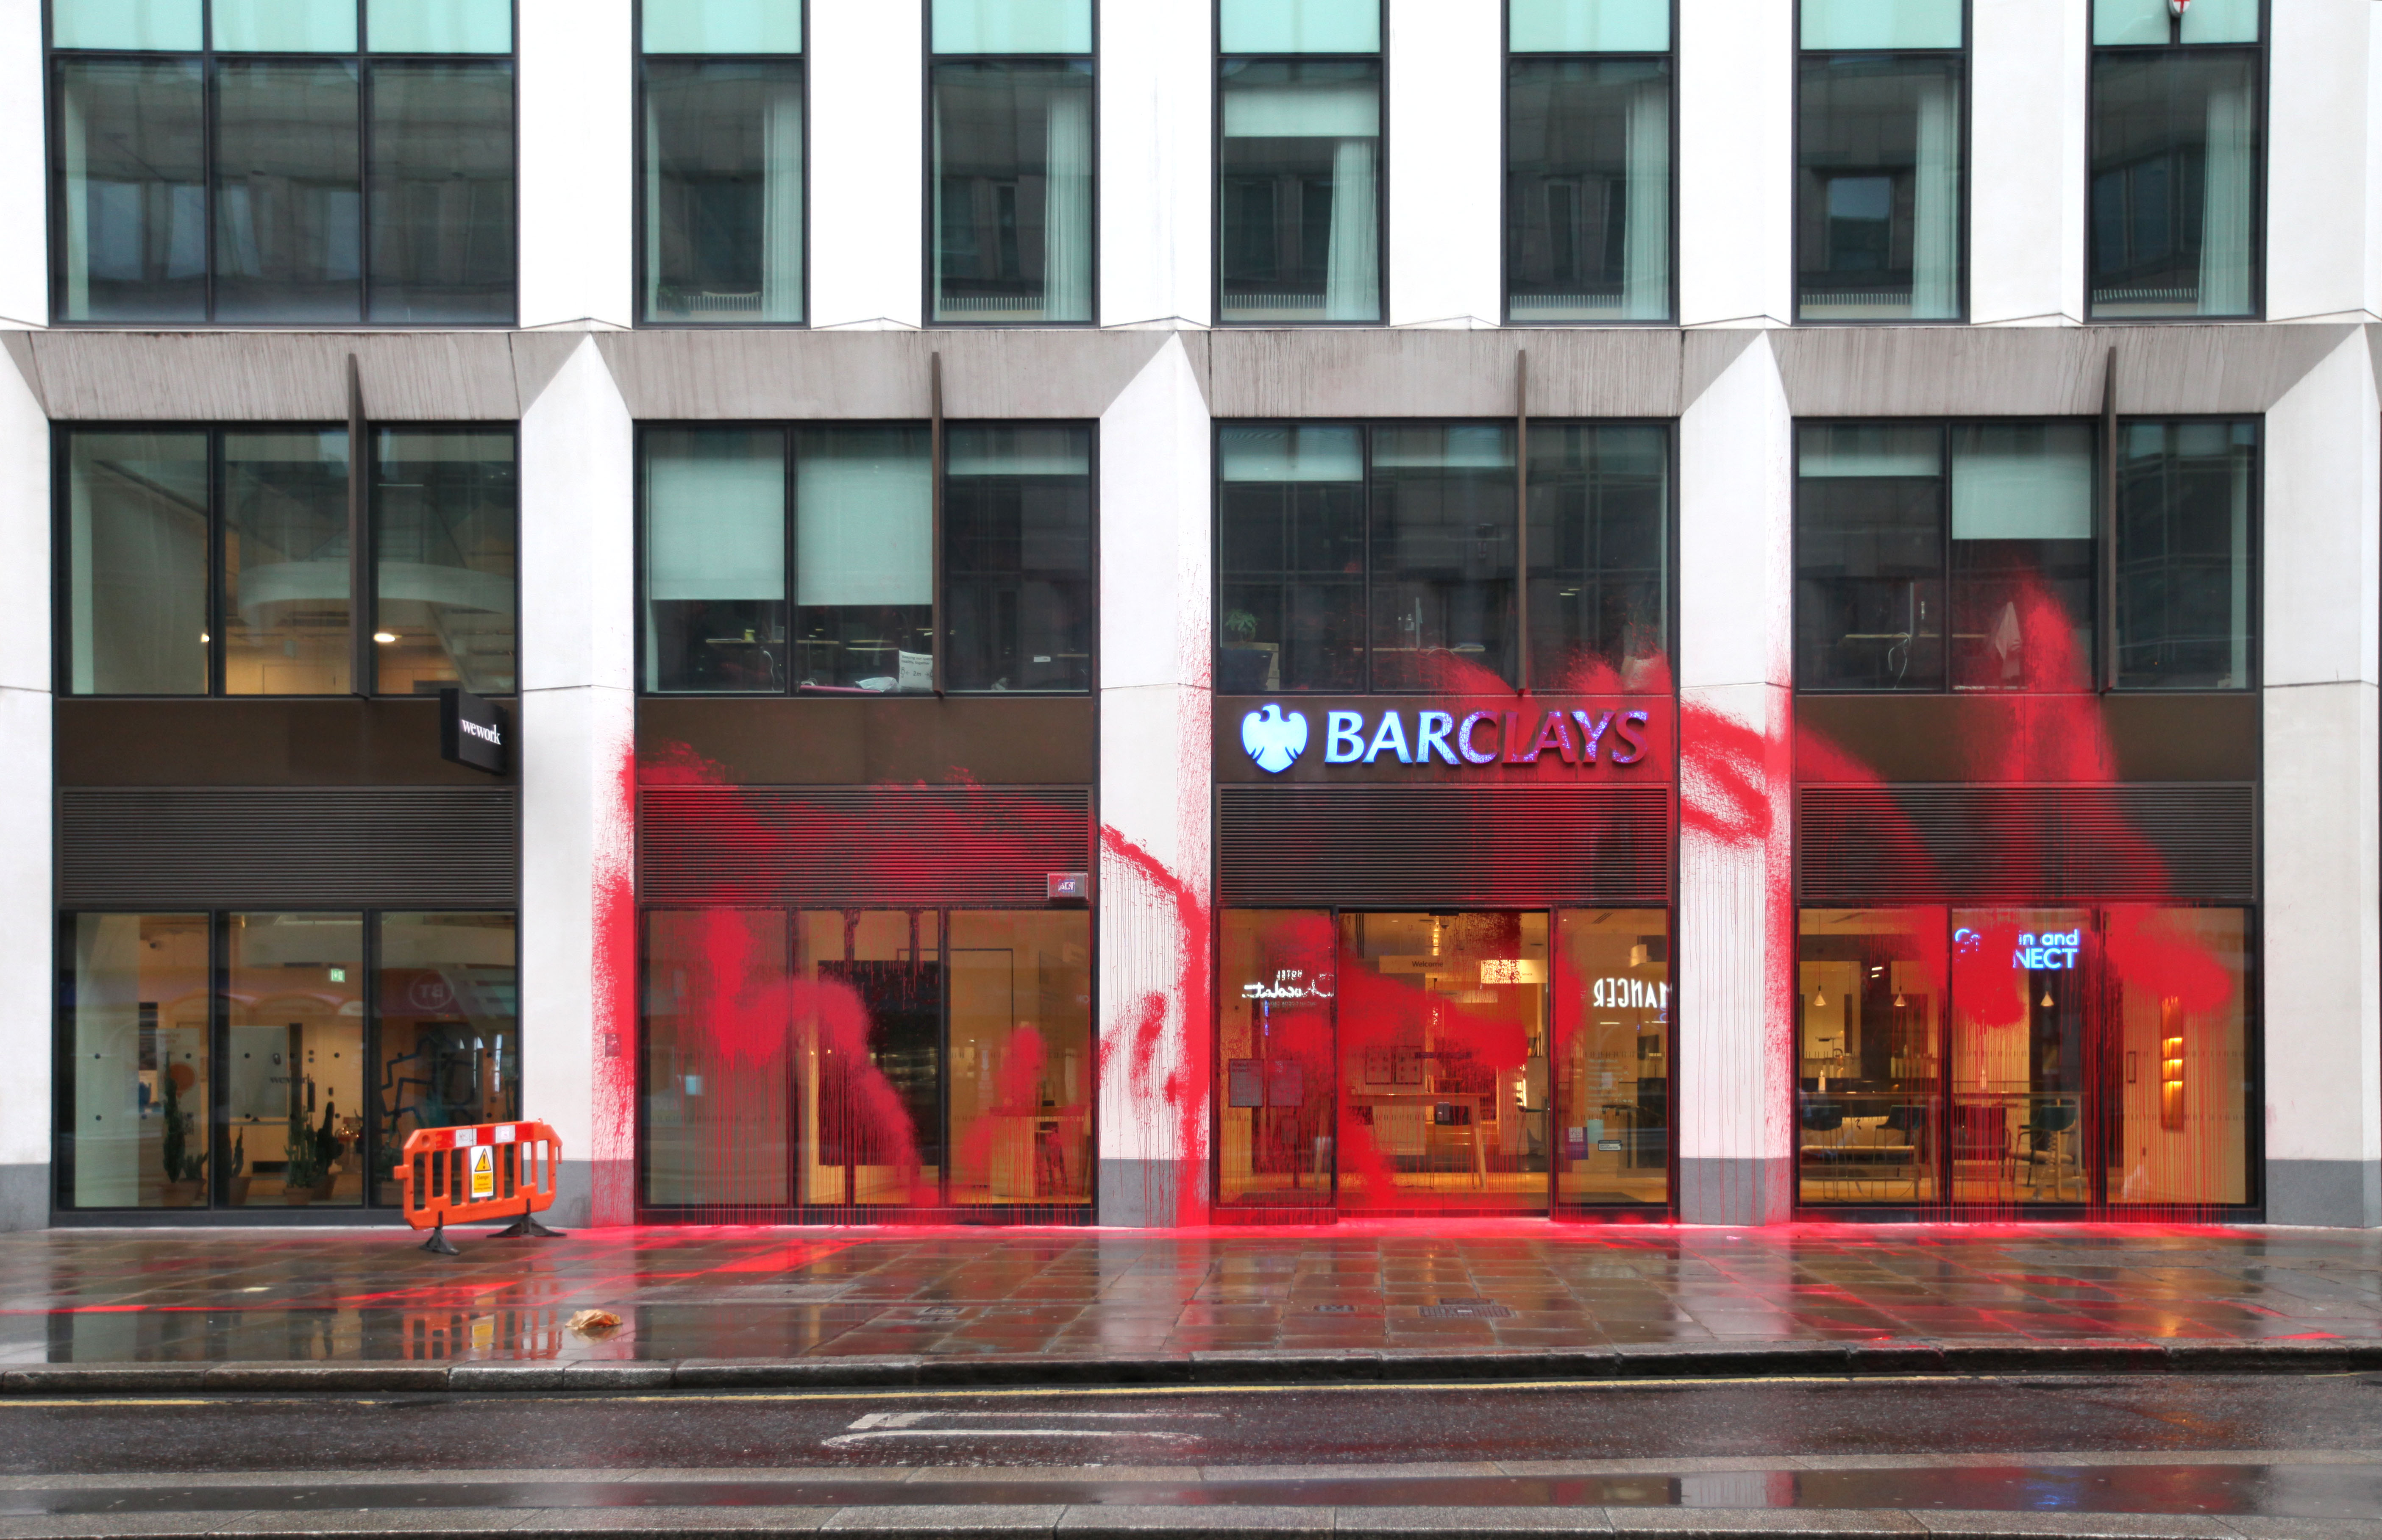 Images sent by Palestine Action show red paint scrawled over the front of a branch in Moorgate, London. 